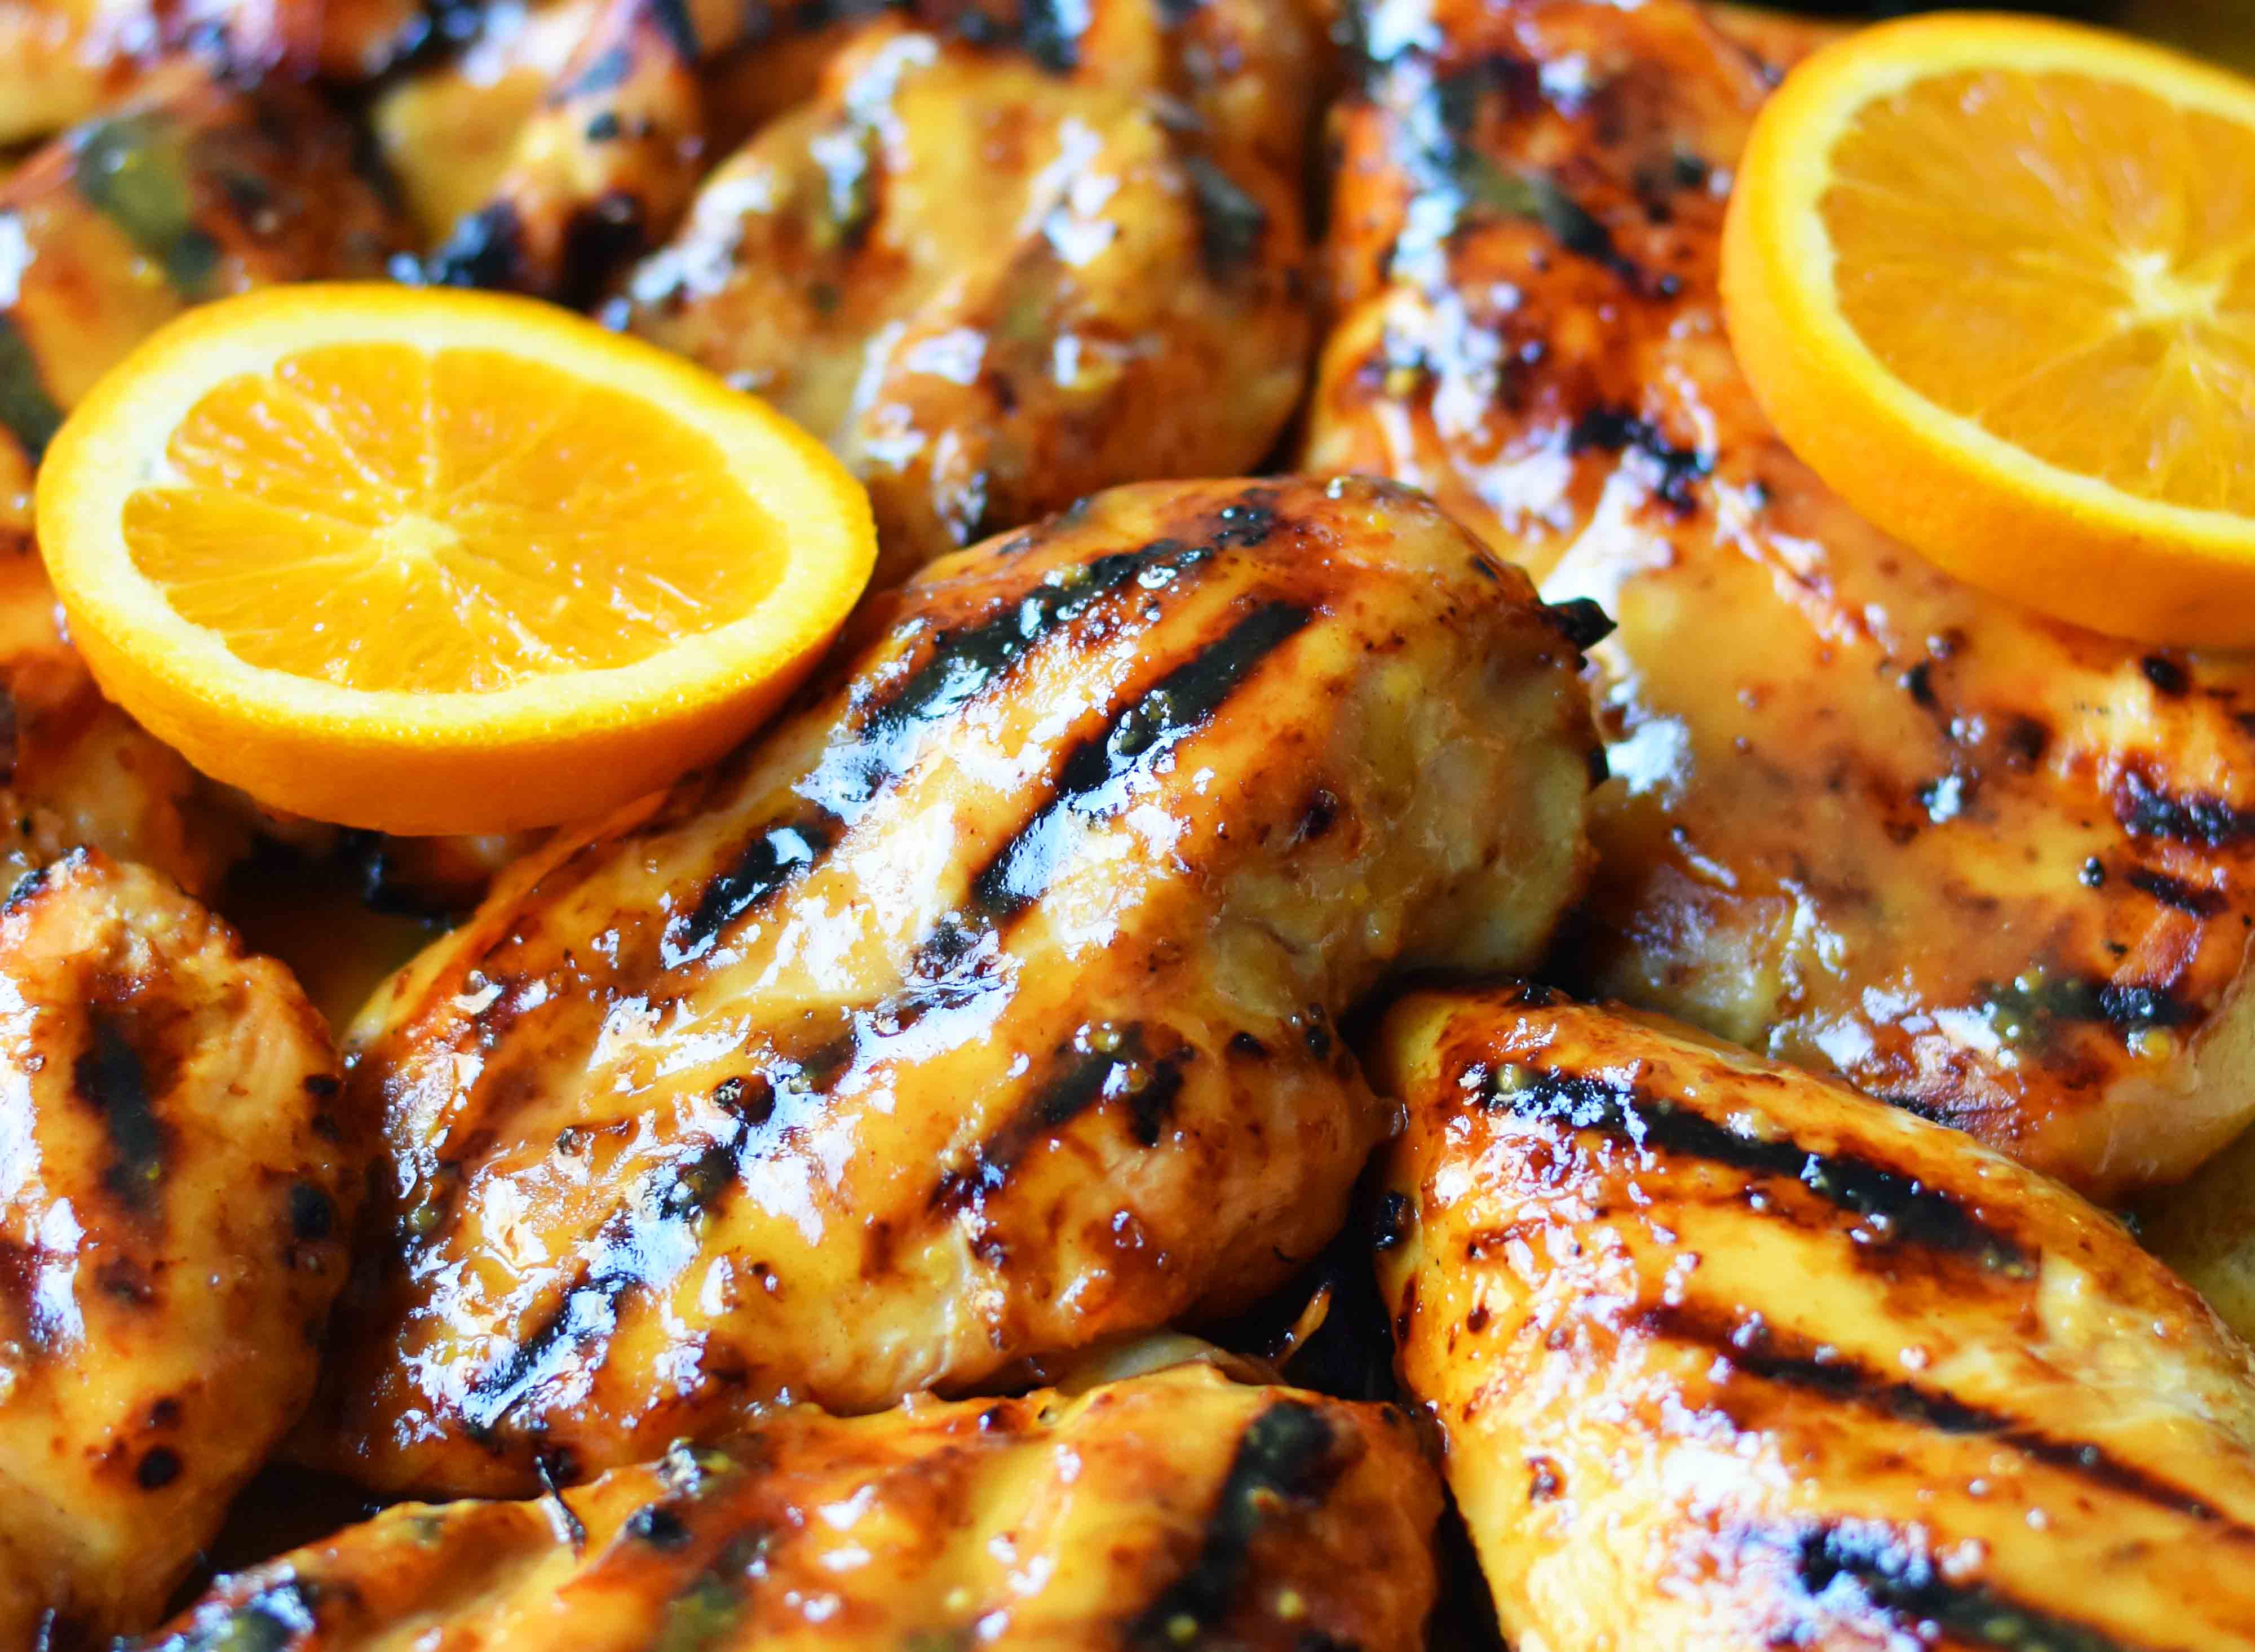 Honey Mustard Grilled Chicken. How to make sweet and tangy grilled honey mustard chicken. A honey mustard marinade and sauce in one! The perfect chicken for your summer BBQ. www.modernhoney.com #honeymustard #honeymustardchicken 